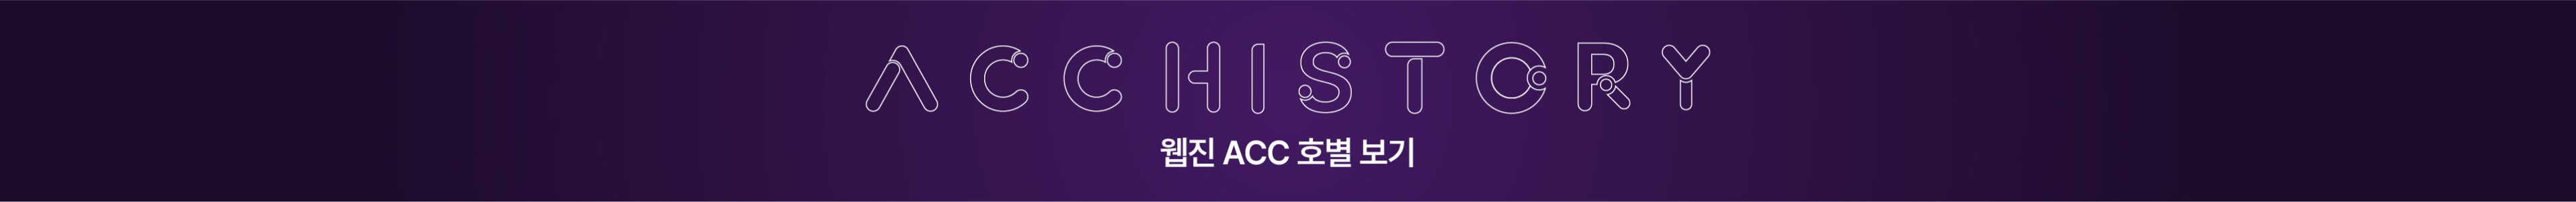 ACC event